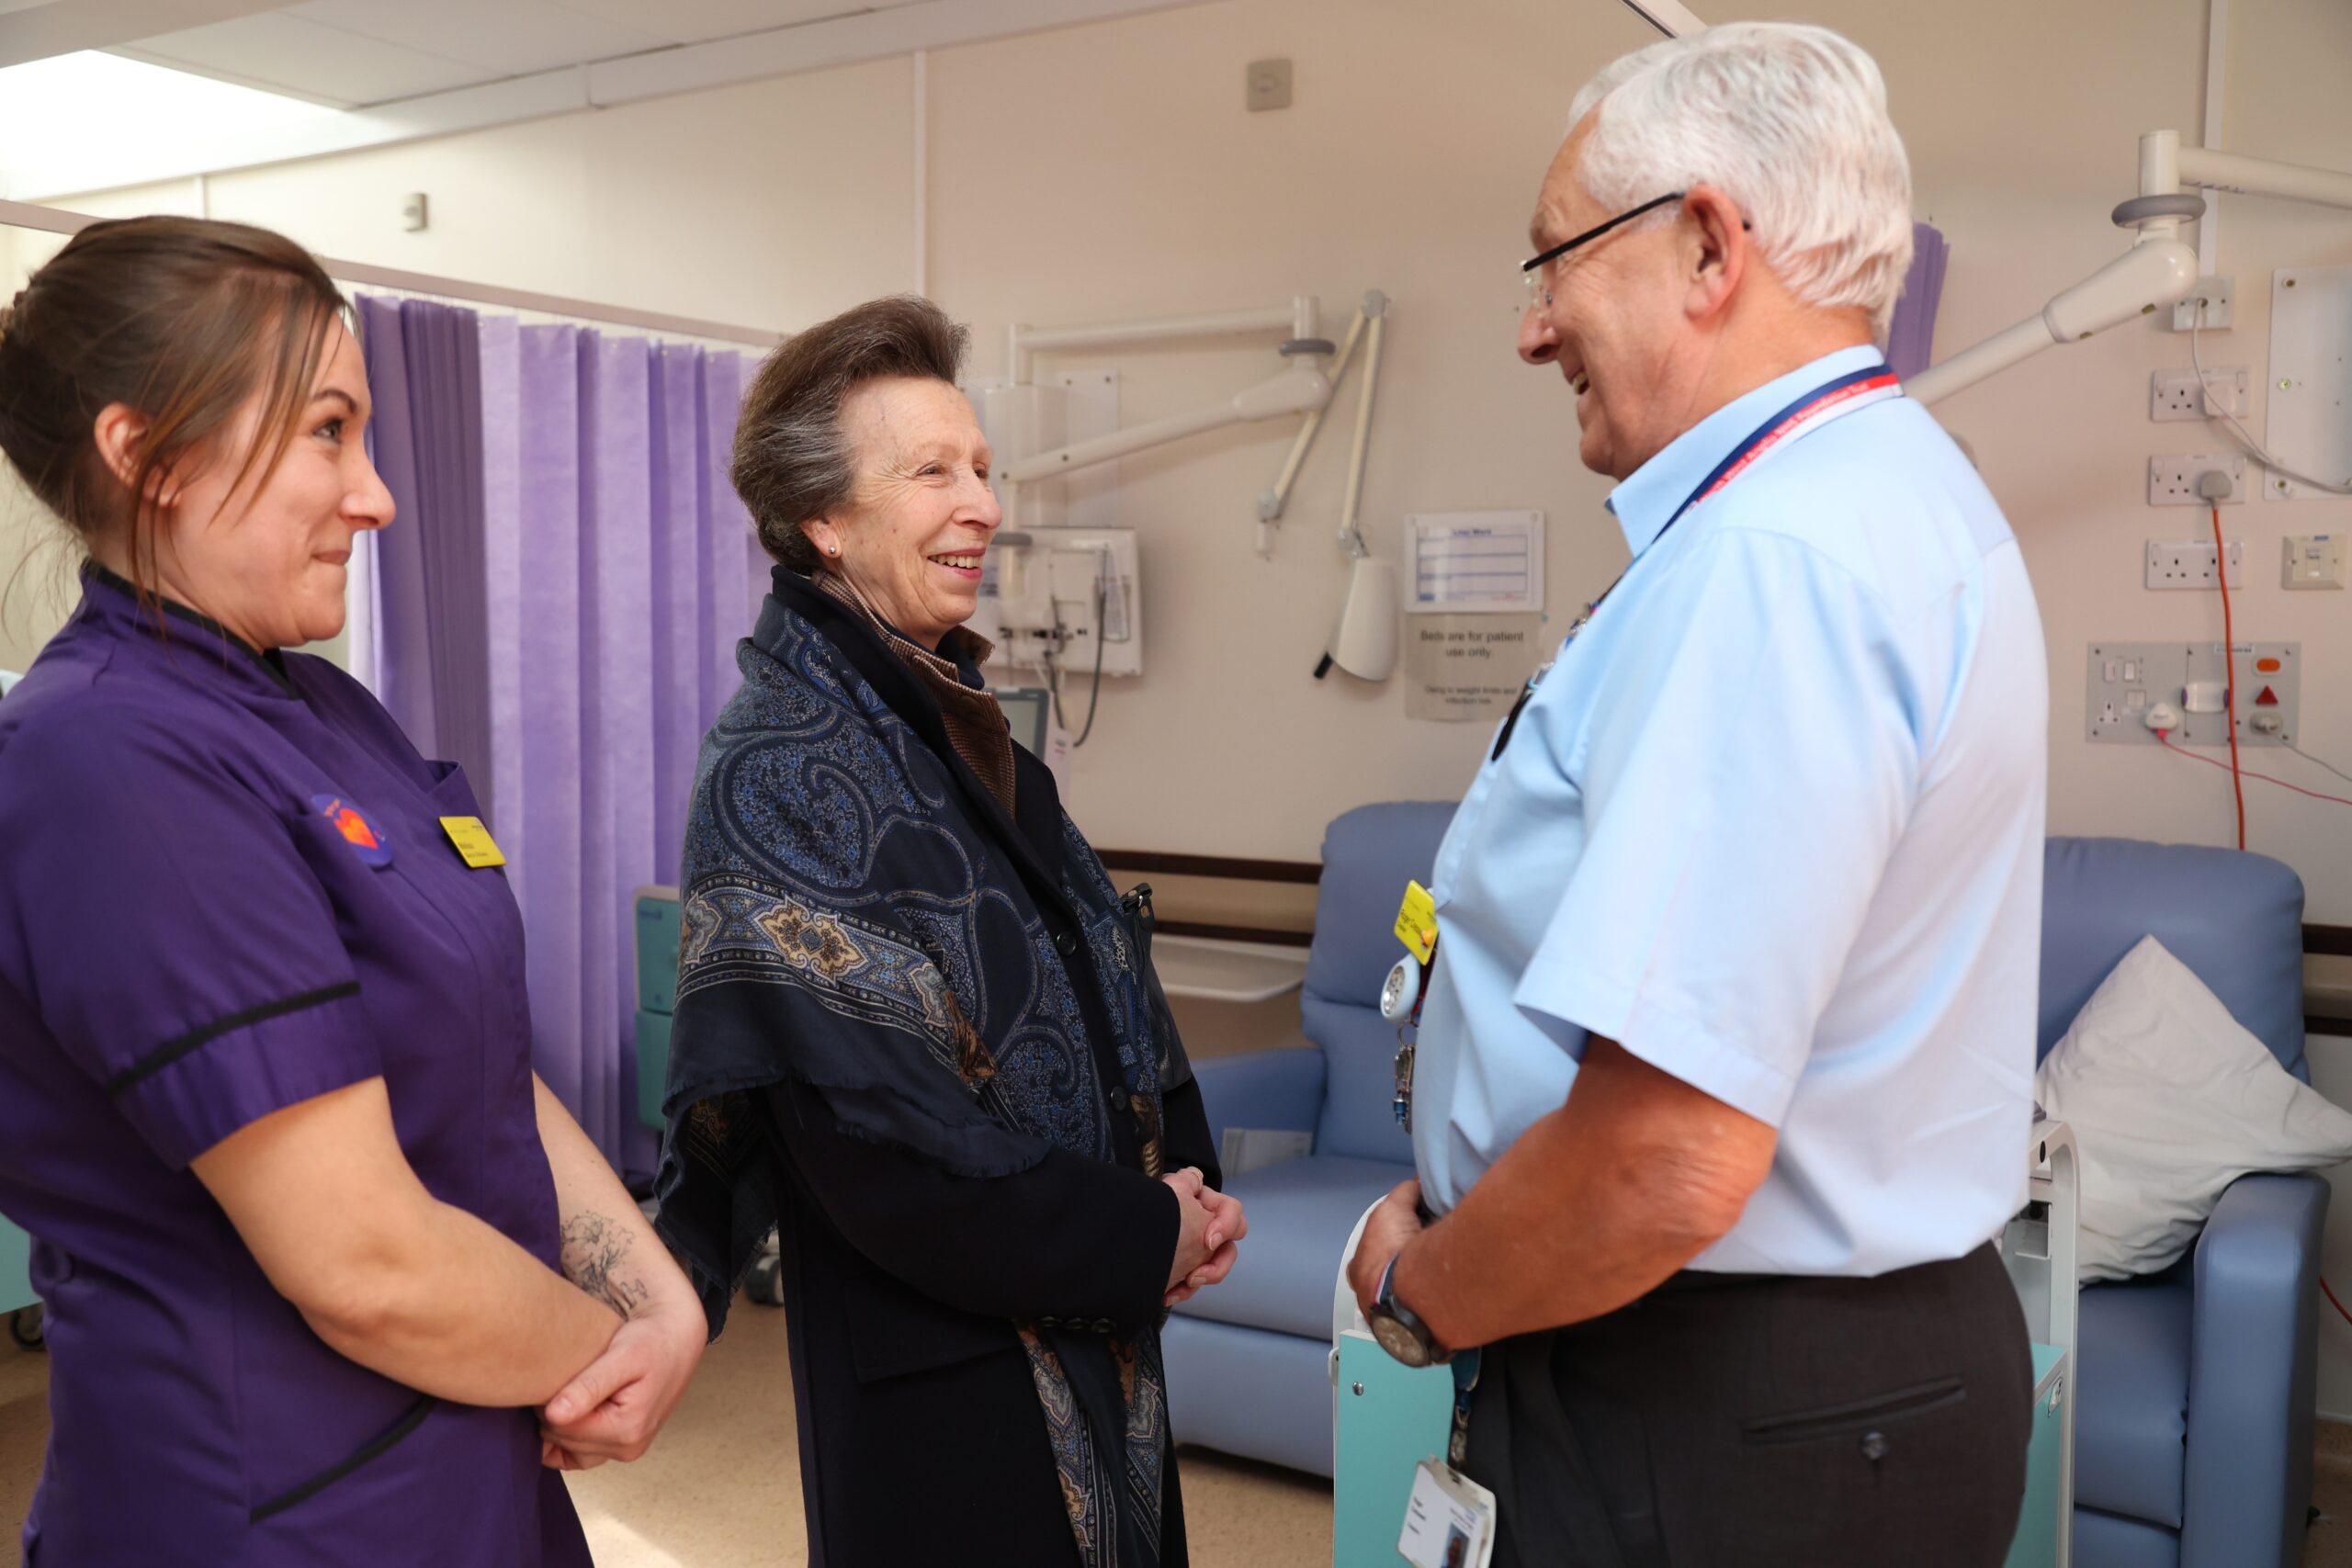 North West Anglia NHS Foundation Trust’s oldest-serving employee, Chaplain Roger Cresswell had the honour of meeting HRH The Princess Royal during her recent visit to Hinchingbrooke Hospital in Huntingdon, introduced by Trust Director of Midwifery, Melissa Davis.